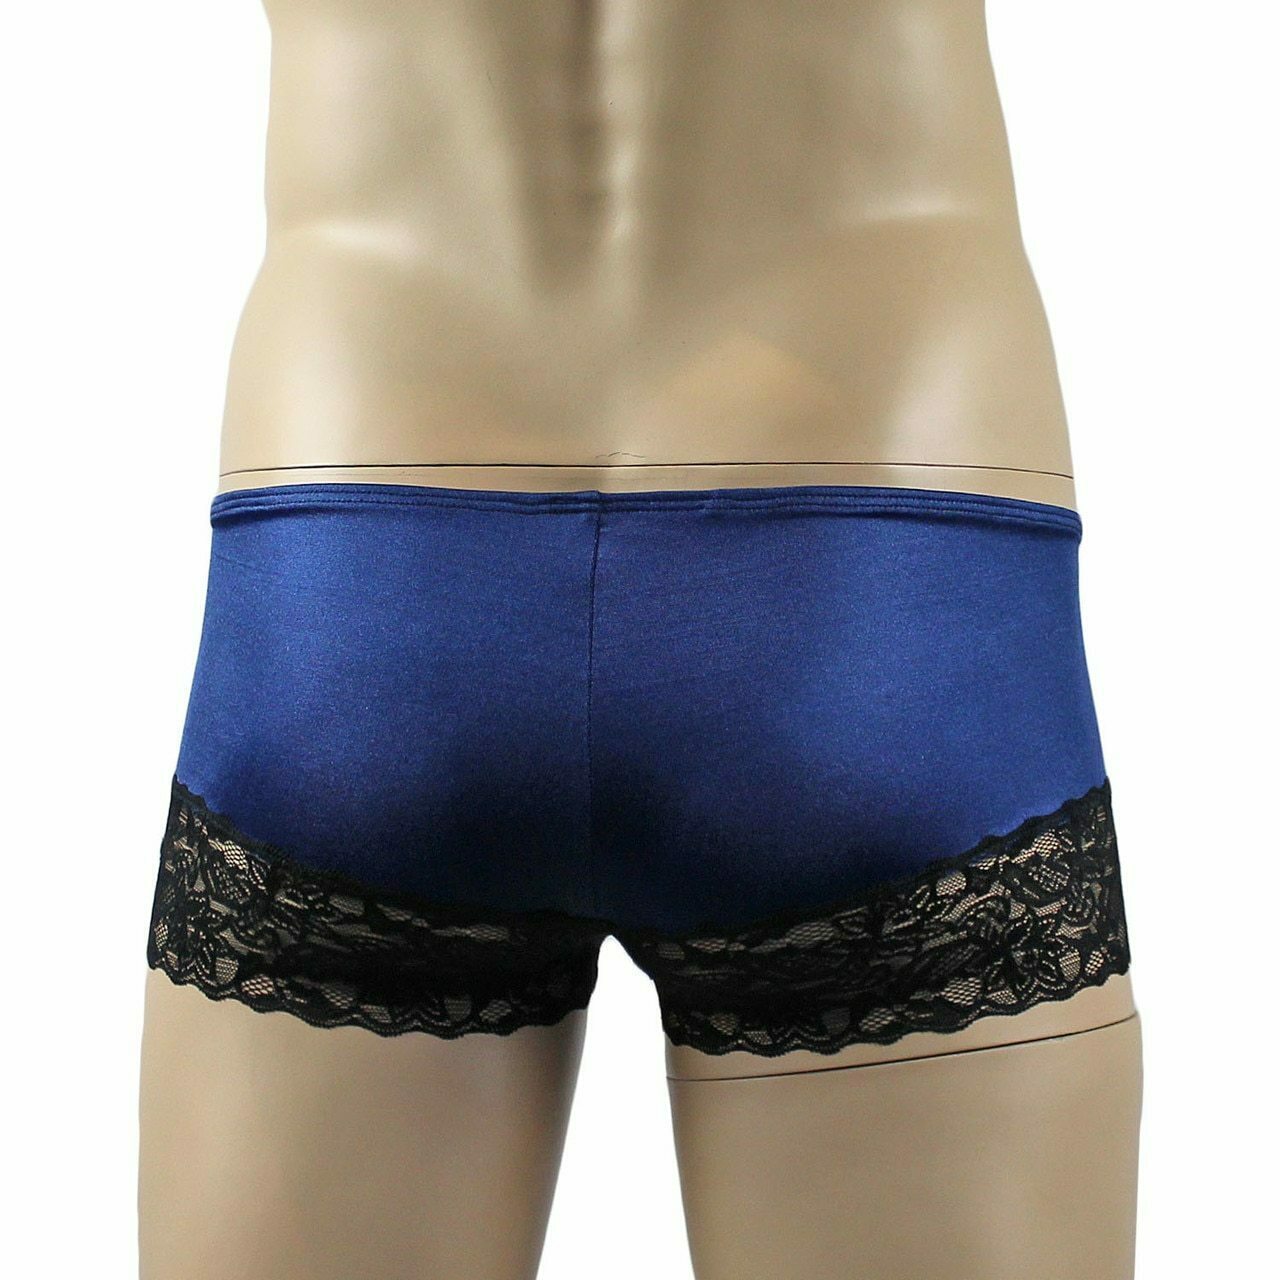 Mens Glamour Lycra & Lace Bra Top, Boxer Brief Shorts with Garterbelt & Stockings